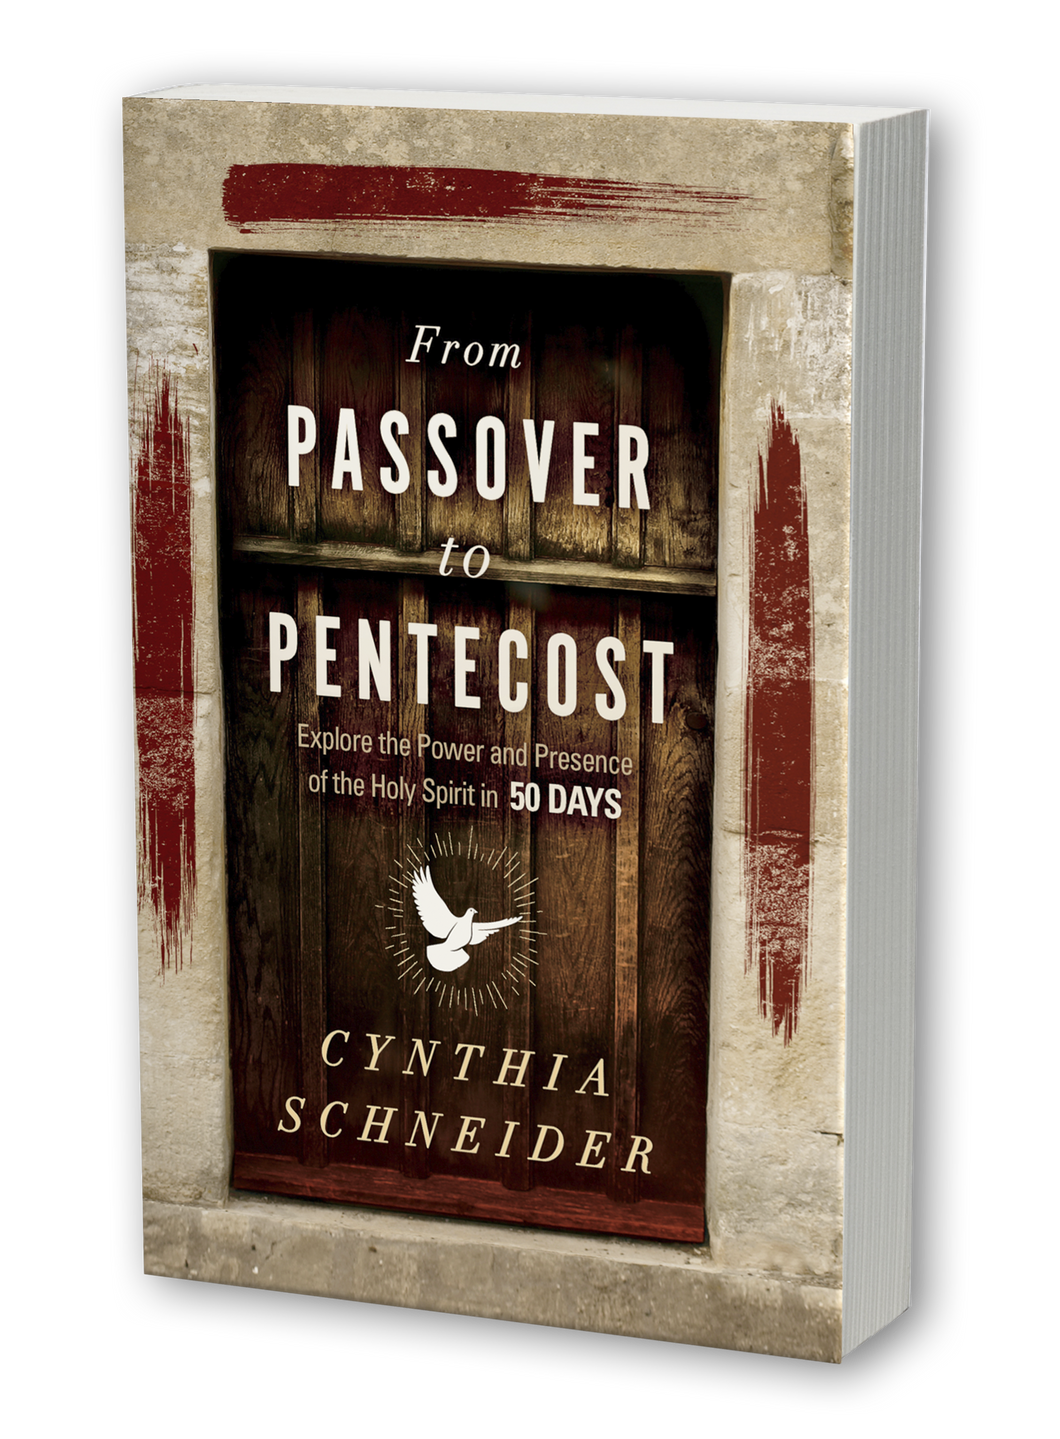 From Passover to Pentecost: Explore the Power and Presence of the Holy Spirit in 50 Days (Hardcover)